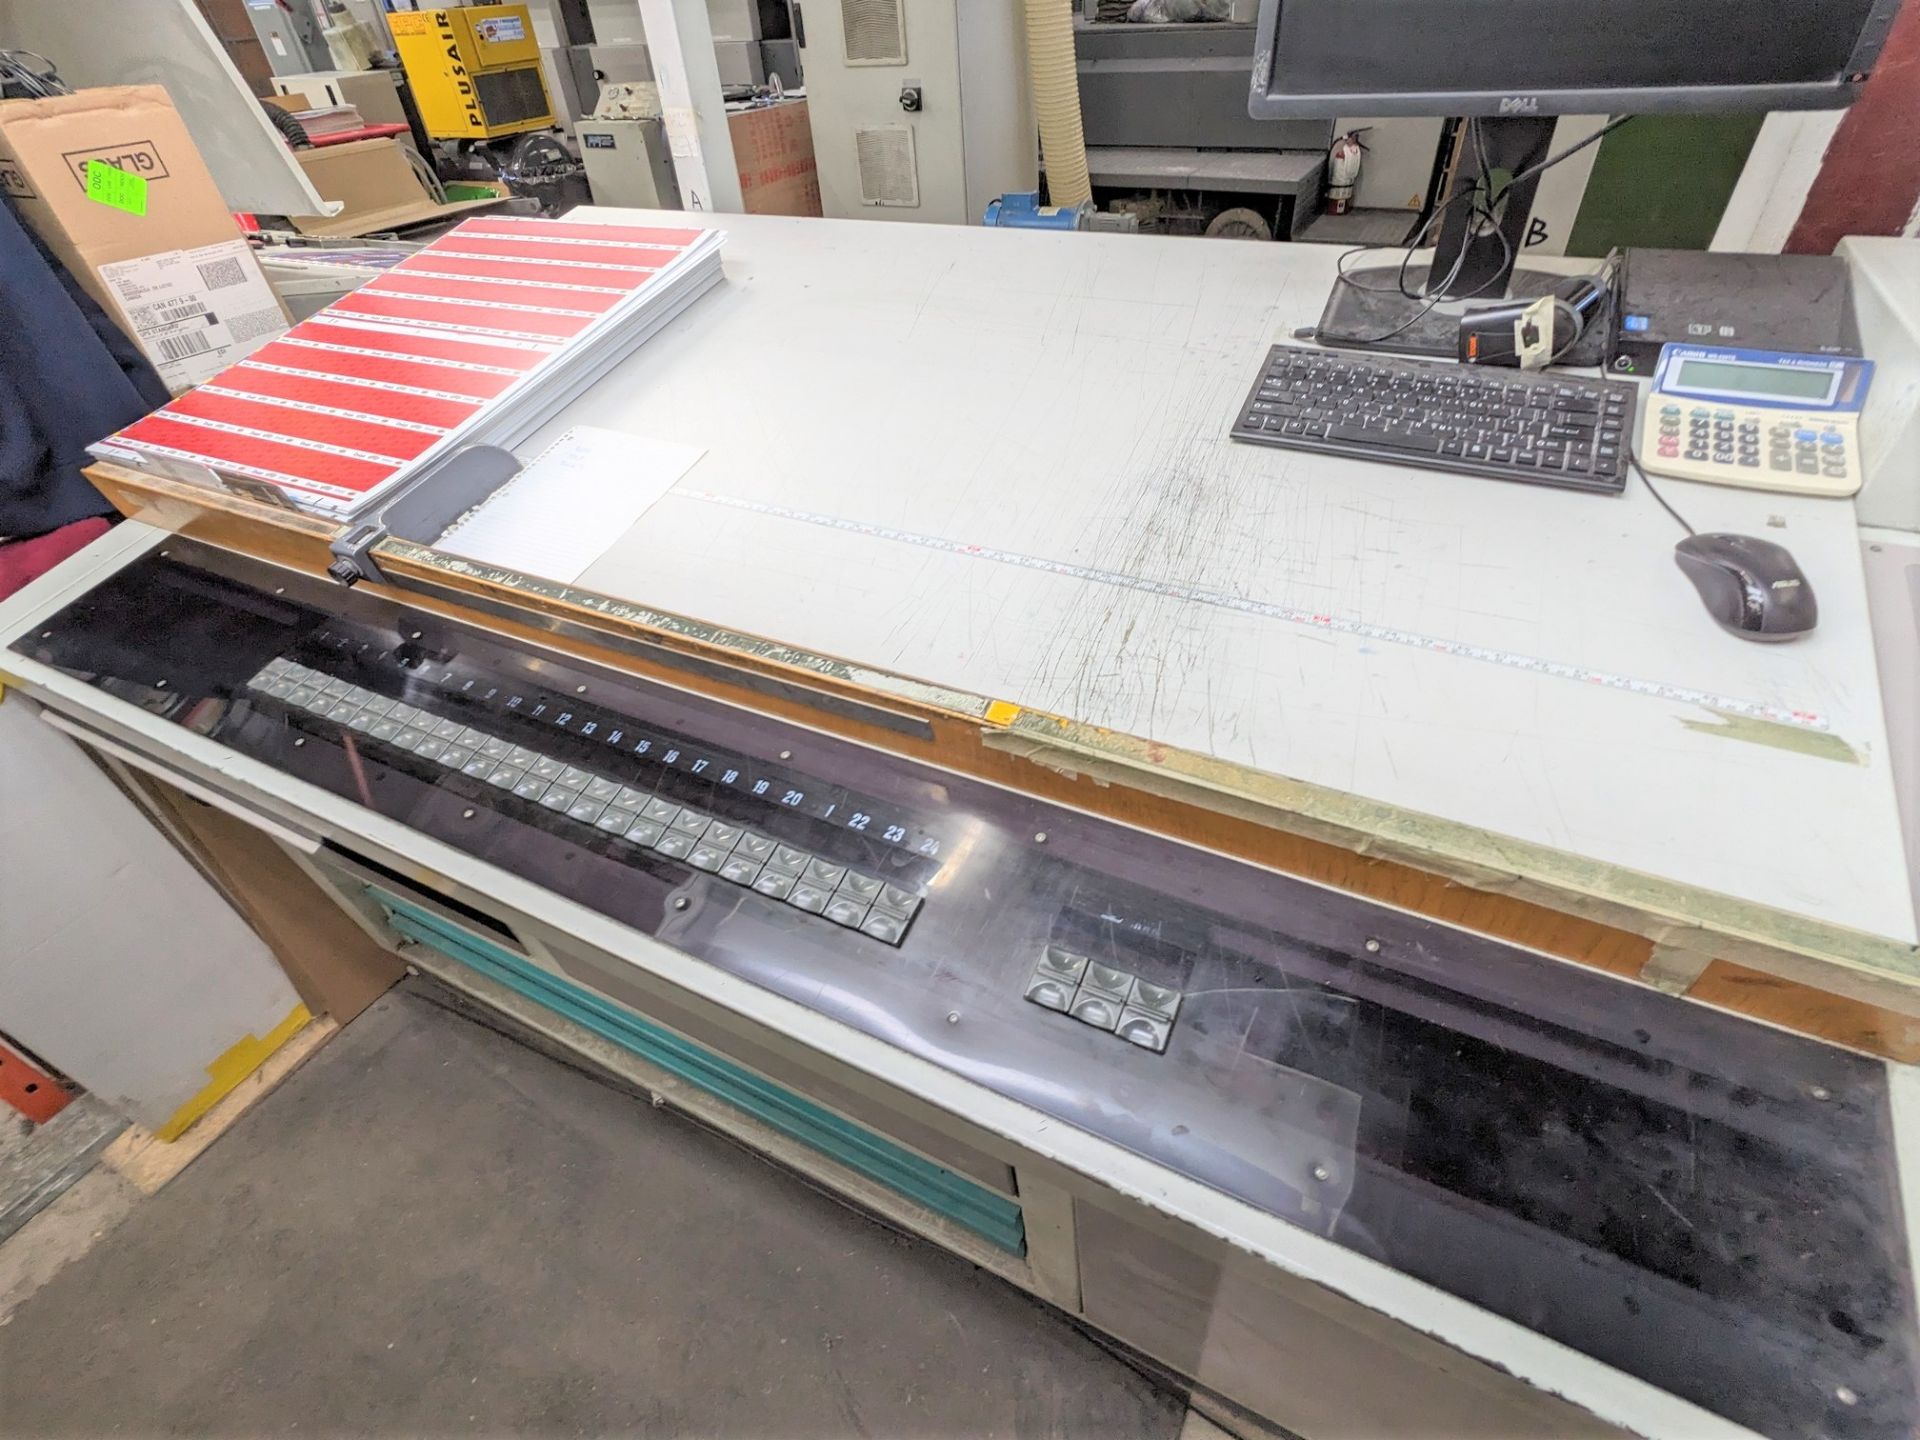 1995 MAN ROLAND 300 6-COLOUR OFFSET PRINTING PRESS, MODEL R306, S/N 25152B, TOTAL SHEET COUNT - Image 50 of 53